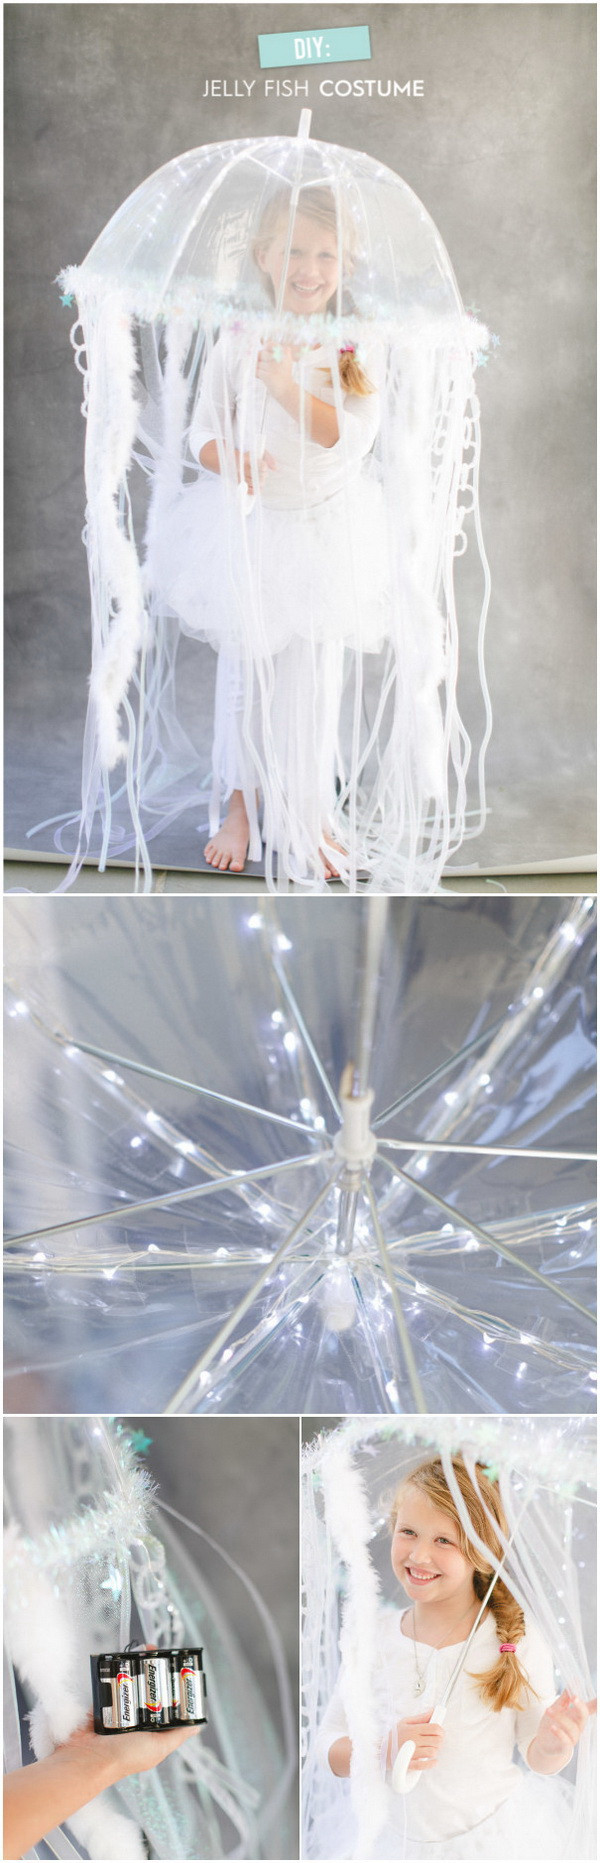 Jellyfish Costume DIY
 20 Creative DIY Halloween Costumes for Kids with Lots of